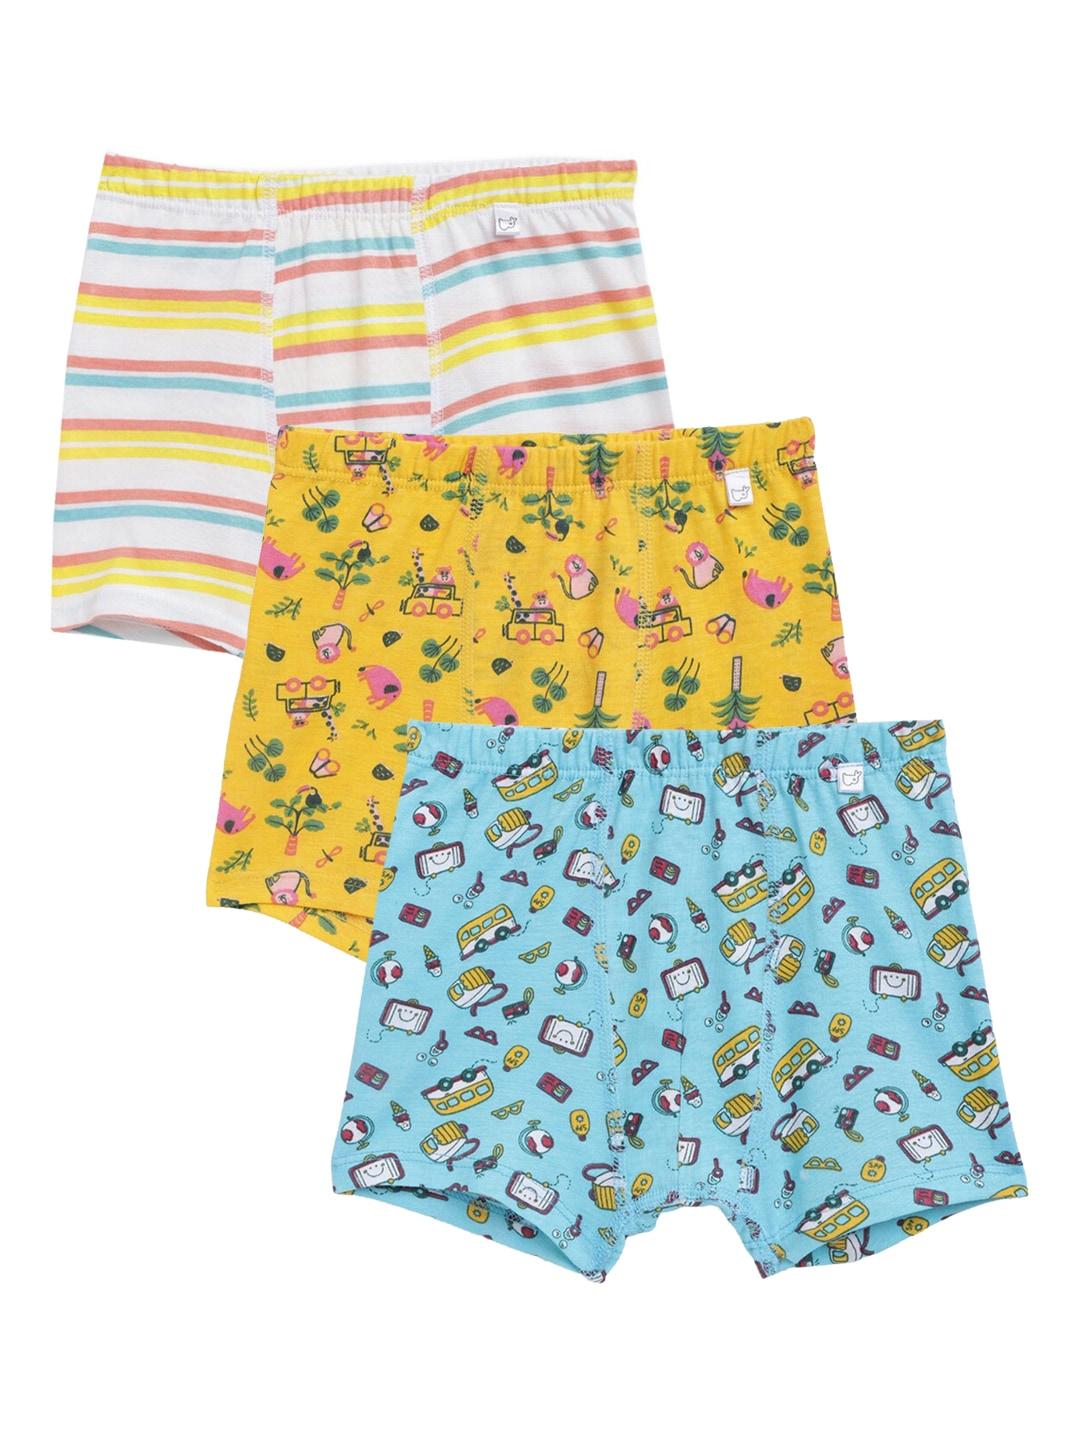 SuperBottoms Pack of 3 Yellow & Blue Printed Boys Briefs